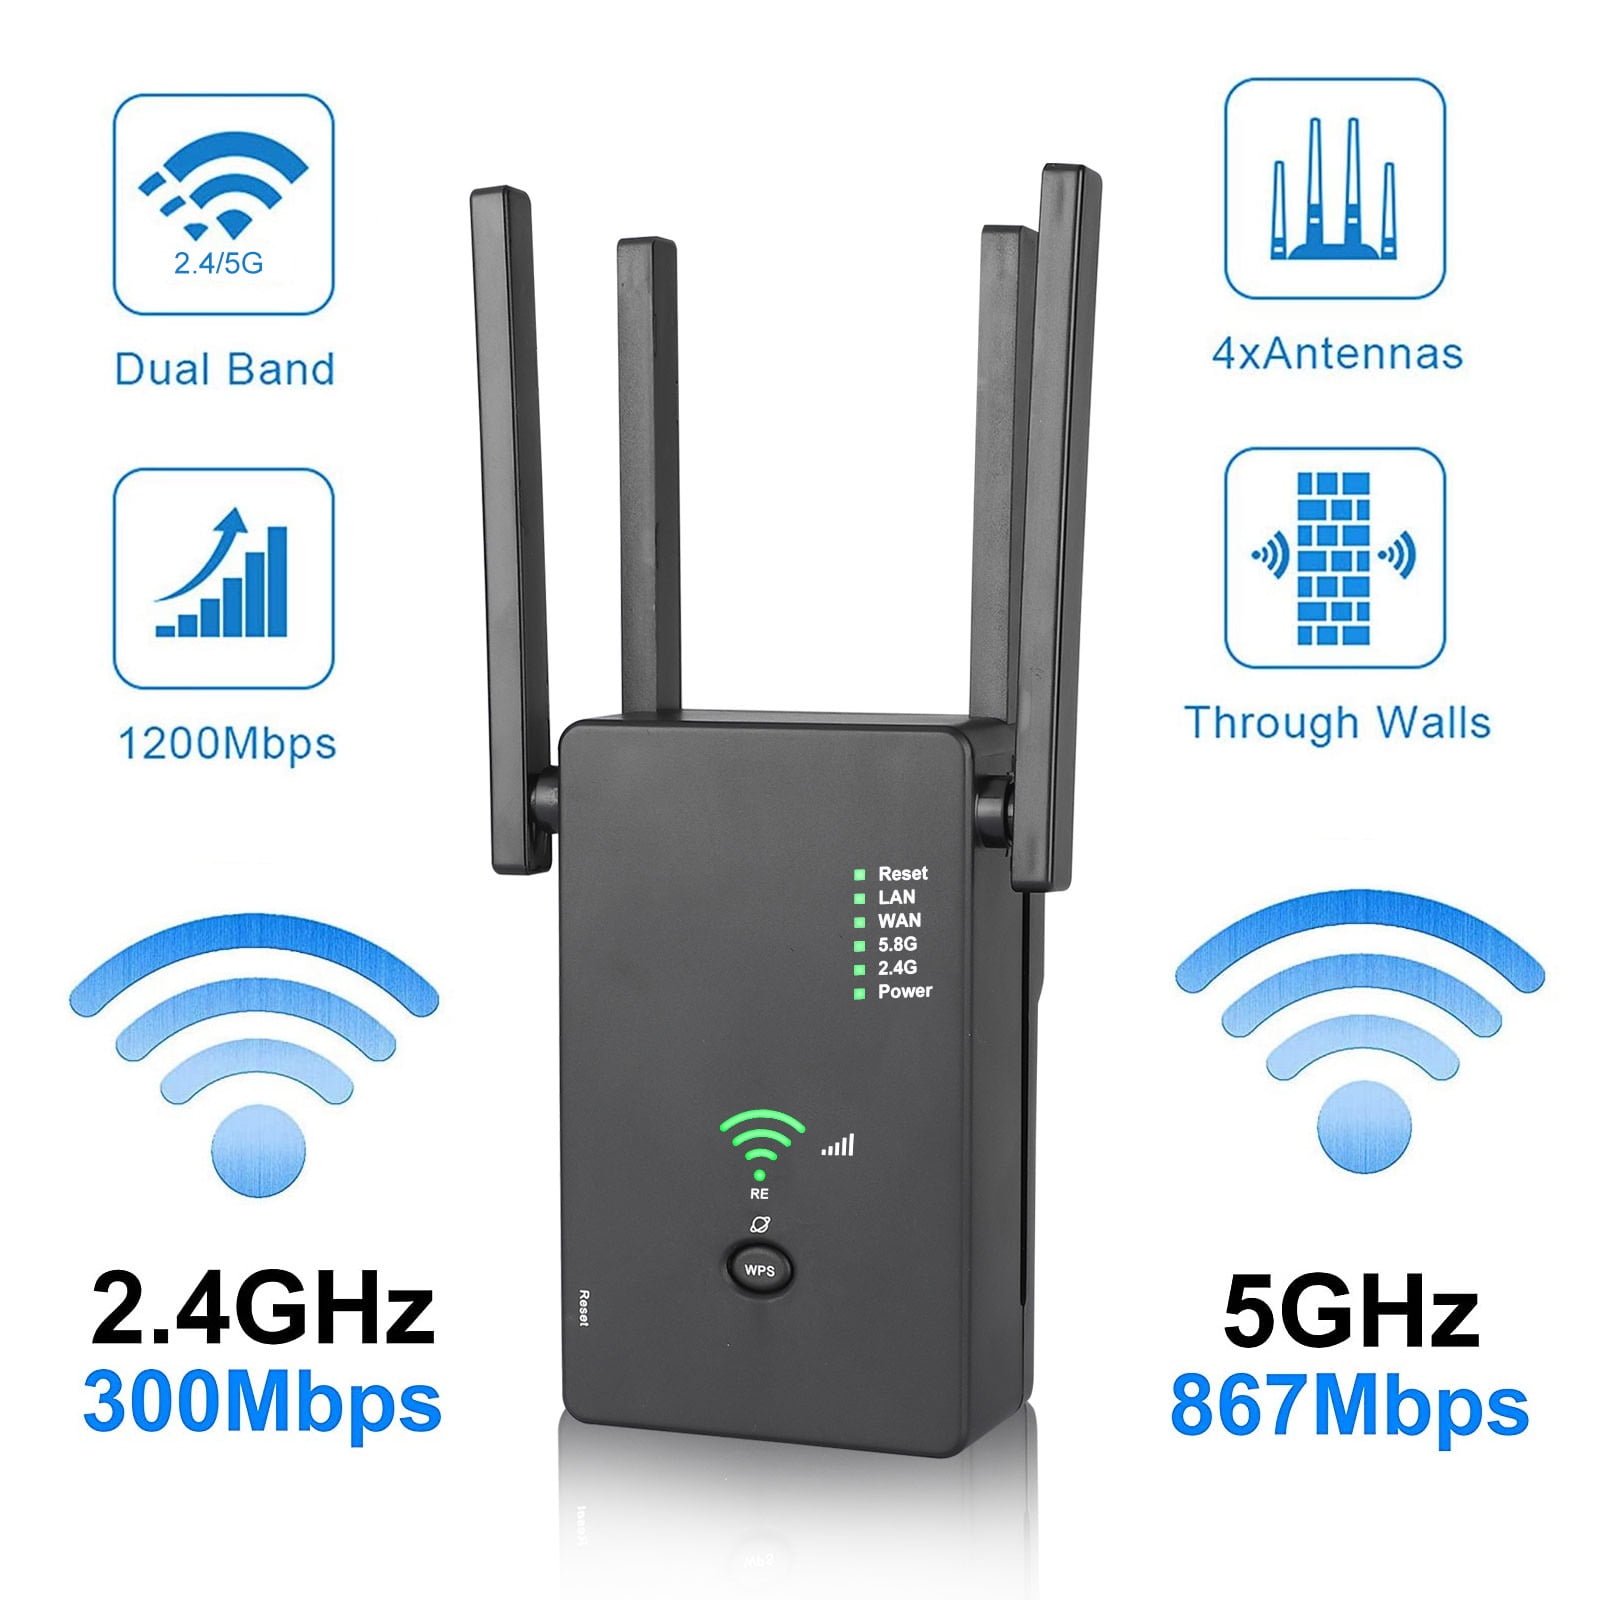 Extend WiFi Signal to Smart Home & Alexa Devices 1200Mbps Wireless Signal Booster WiFi Extender 4 Antennas Covers Up to 2500Sq.ft and 25 Devices 2 Ethernet Port